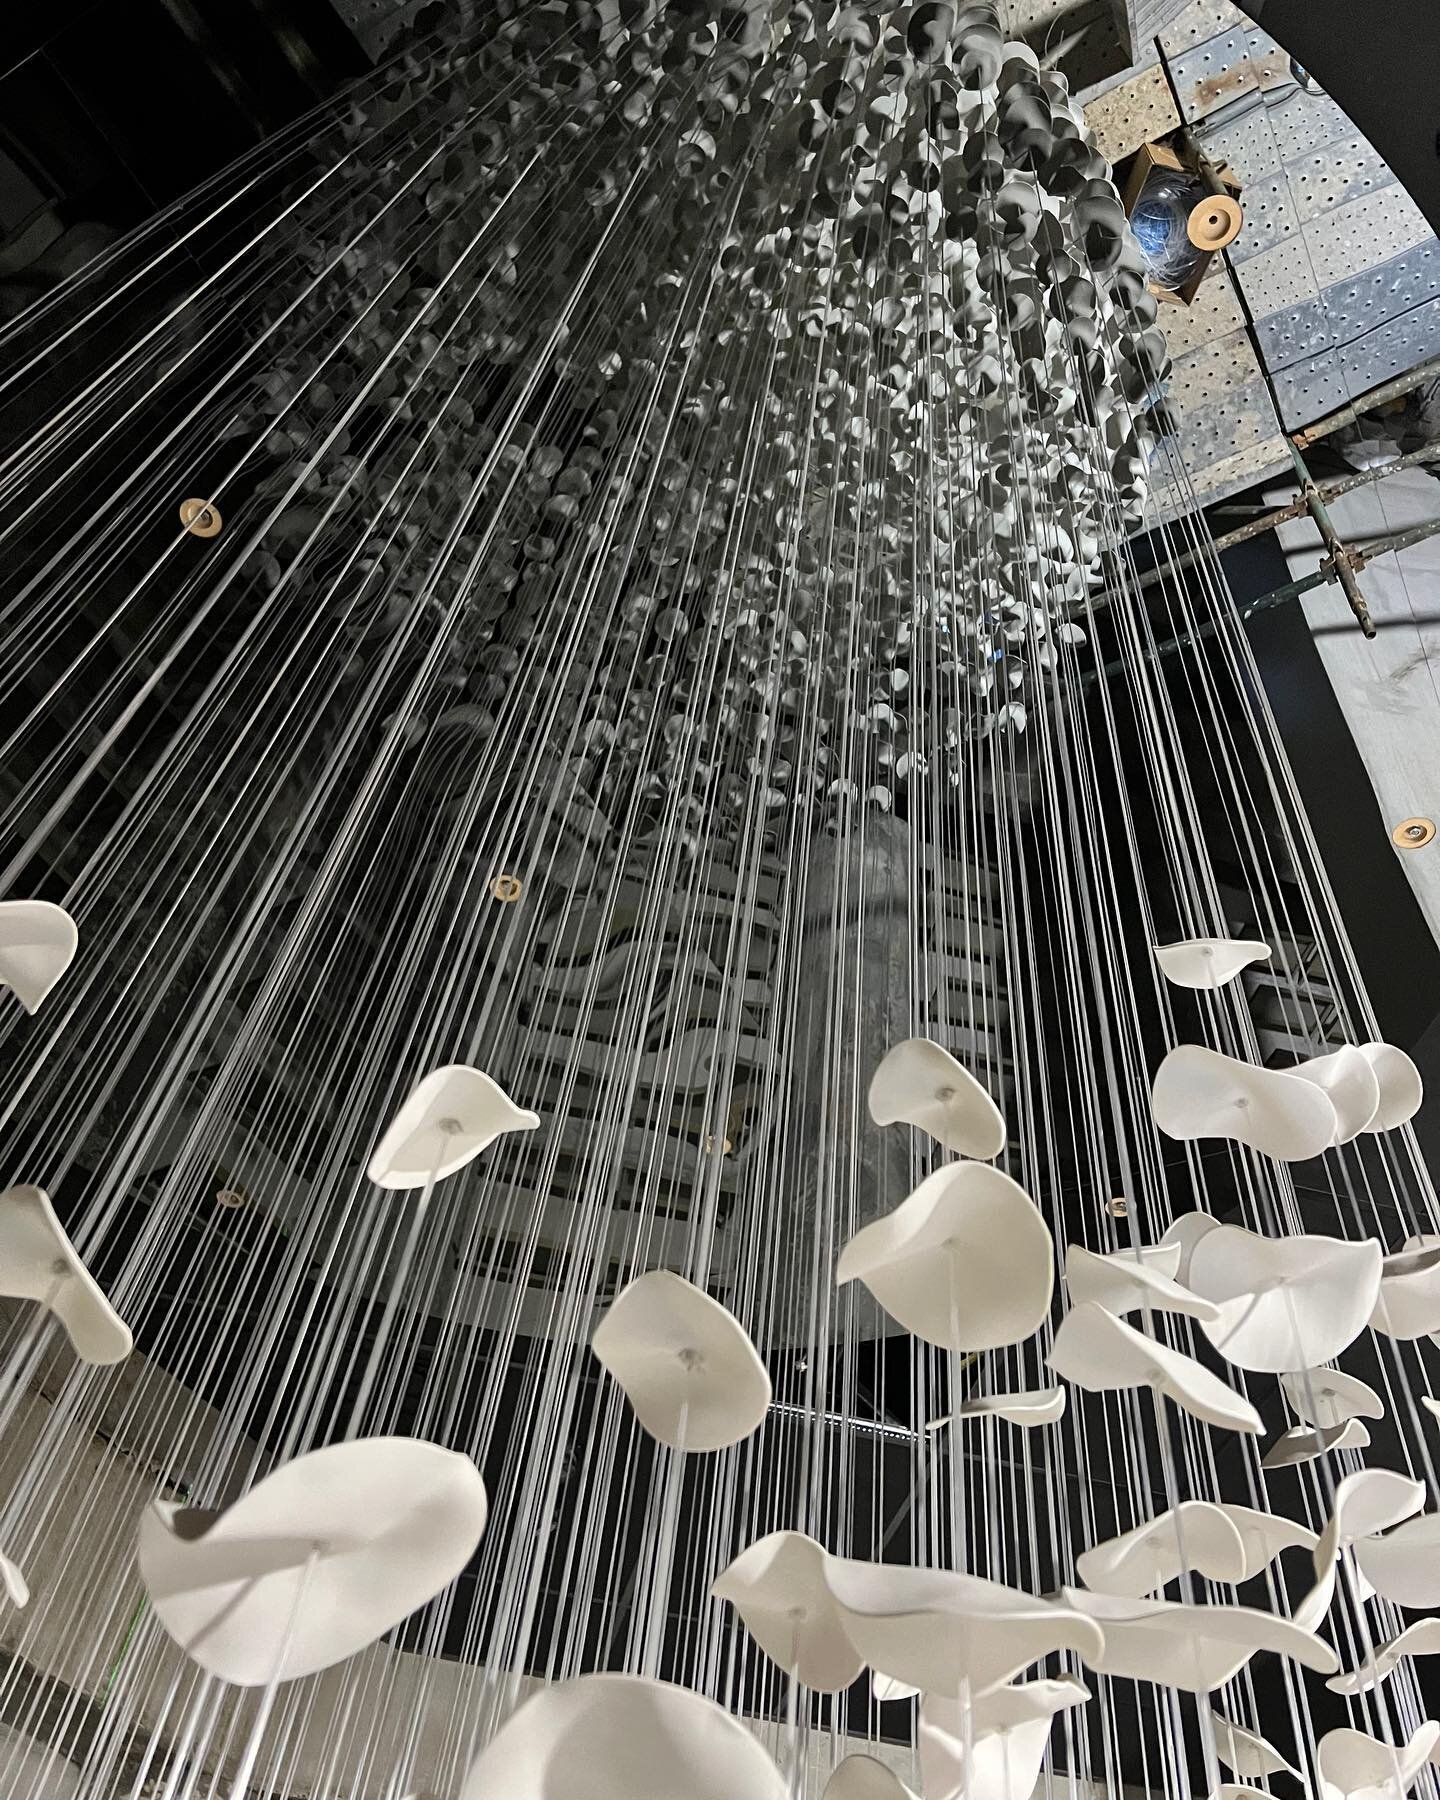 ⁣
Installation details:⁣
@yugendining 
⁣
Image 1 - An incredible view of the porcelain reflected in the canopy during the Yugen installation. ⁣
⁣
Two thousand hand formed porcelain forms were threaded by hand on site over the course of a week. ⁣
⁣
Im